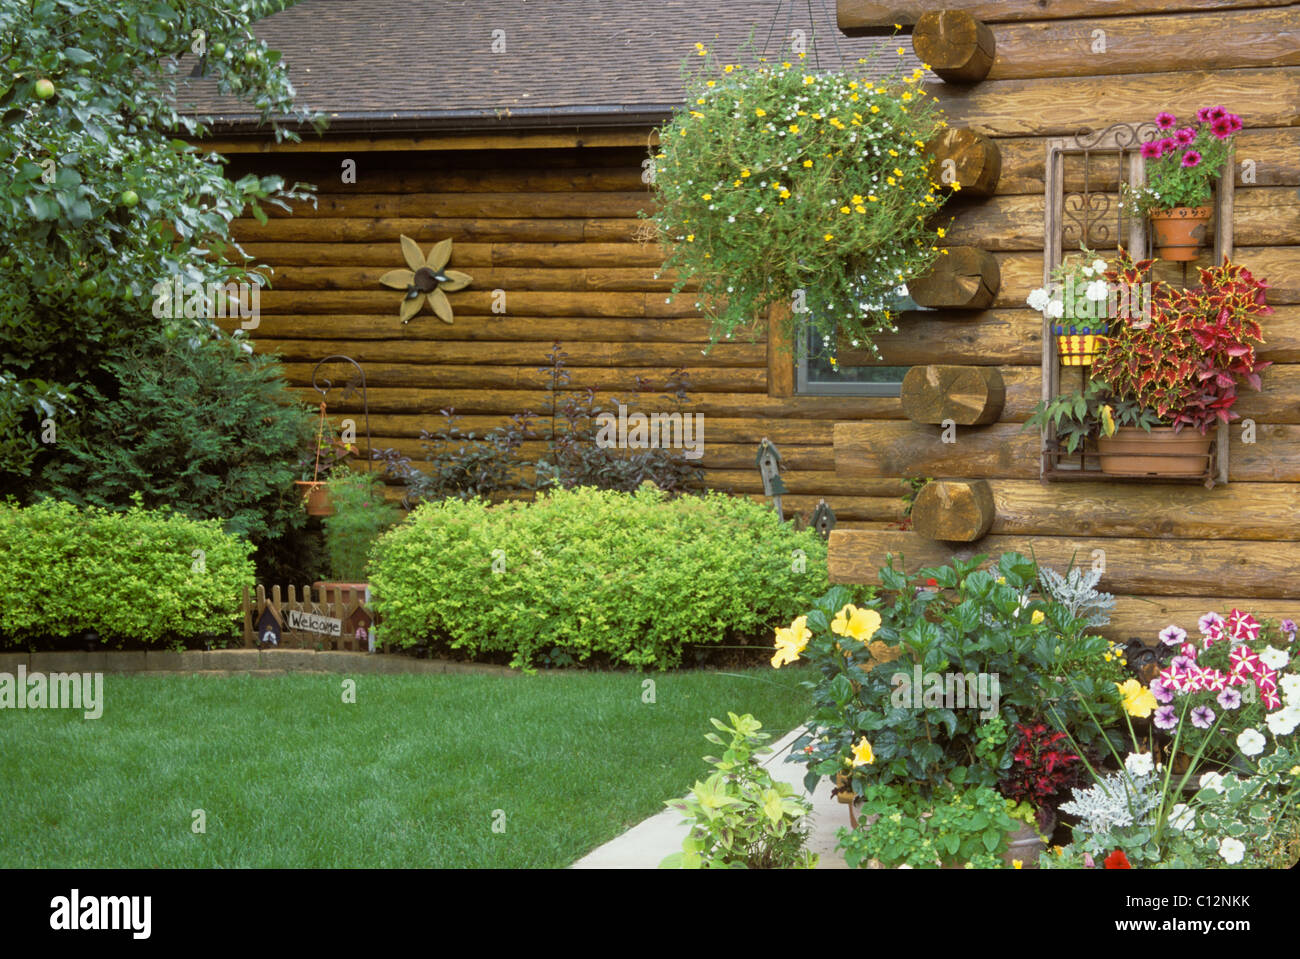 LOG HOME IN THE COUNTRY ACCENTED WITH SHRUBS AND CONTAINER PLANTS.  SUMMER.  AMERICA. Stock Photo